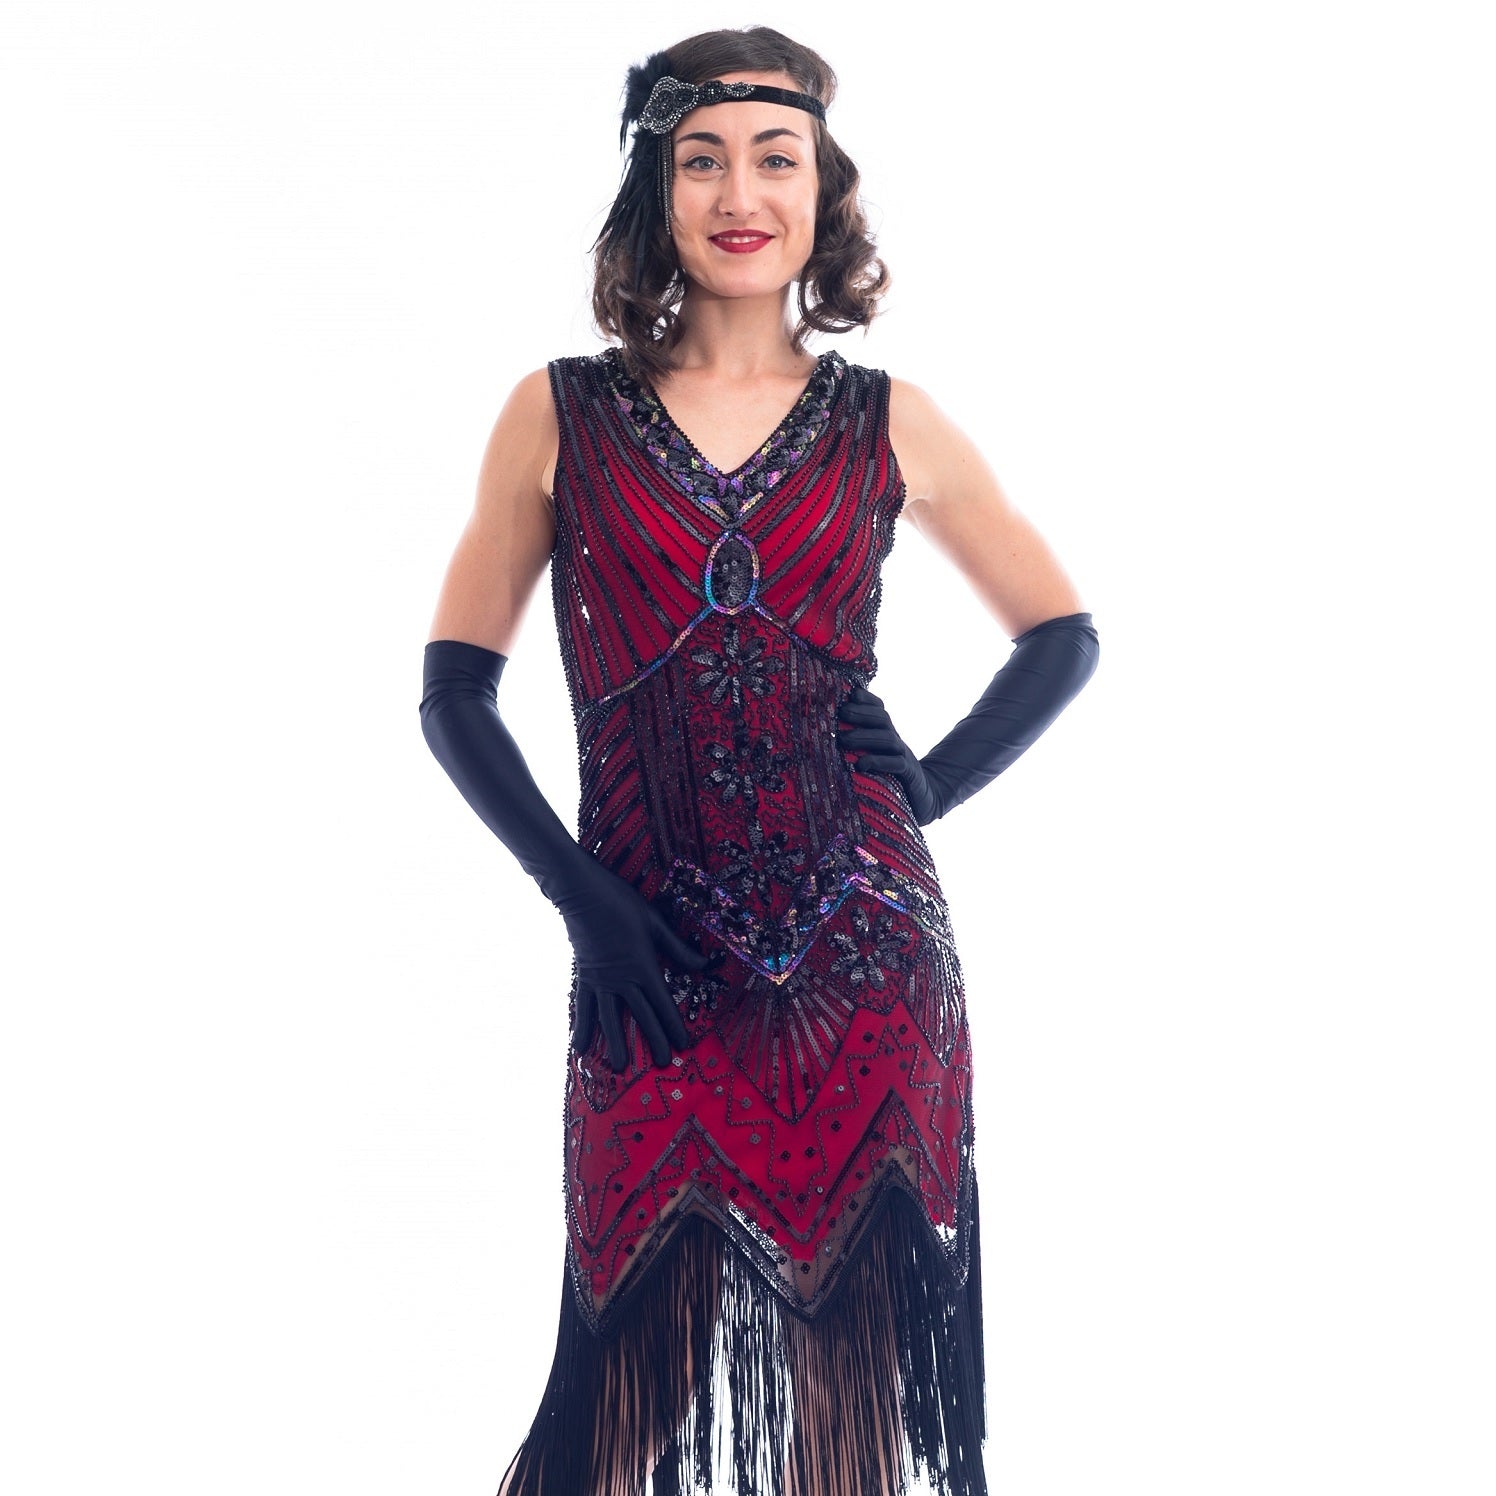 A close view of a Vintage Red 1920s Flapper Dress with black beads, black sequins & fringes around the hem